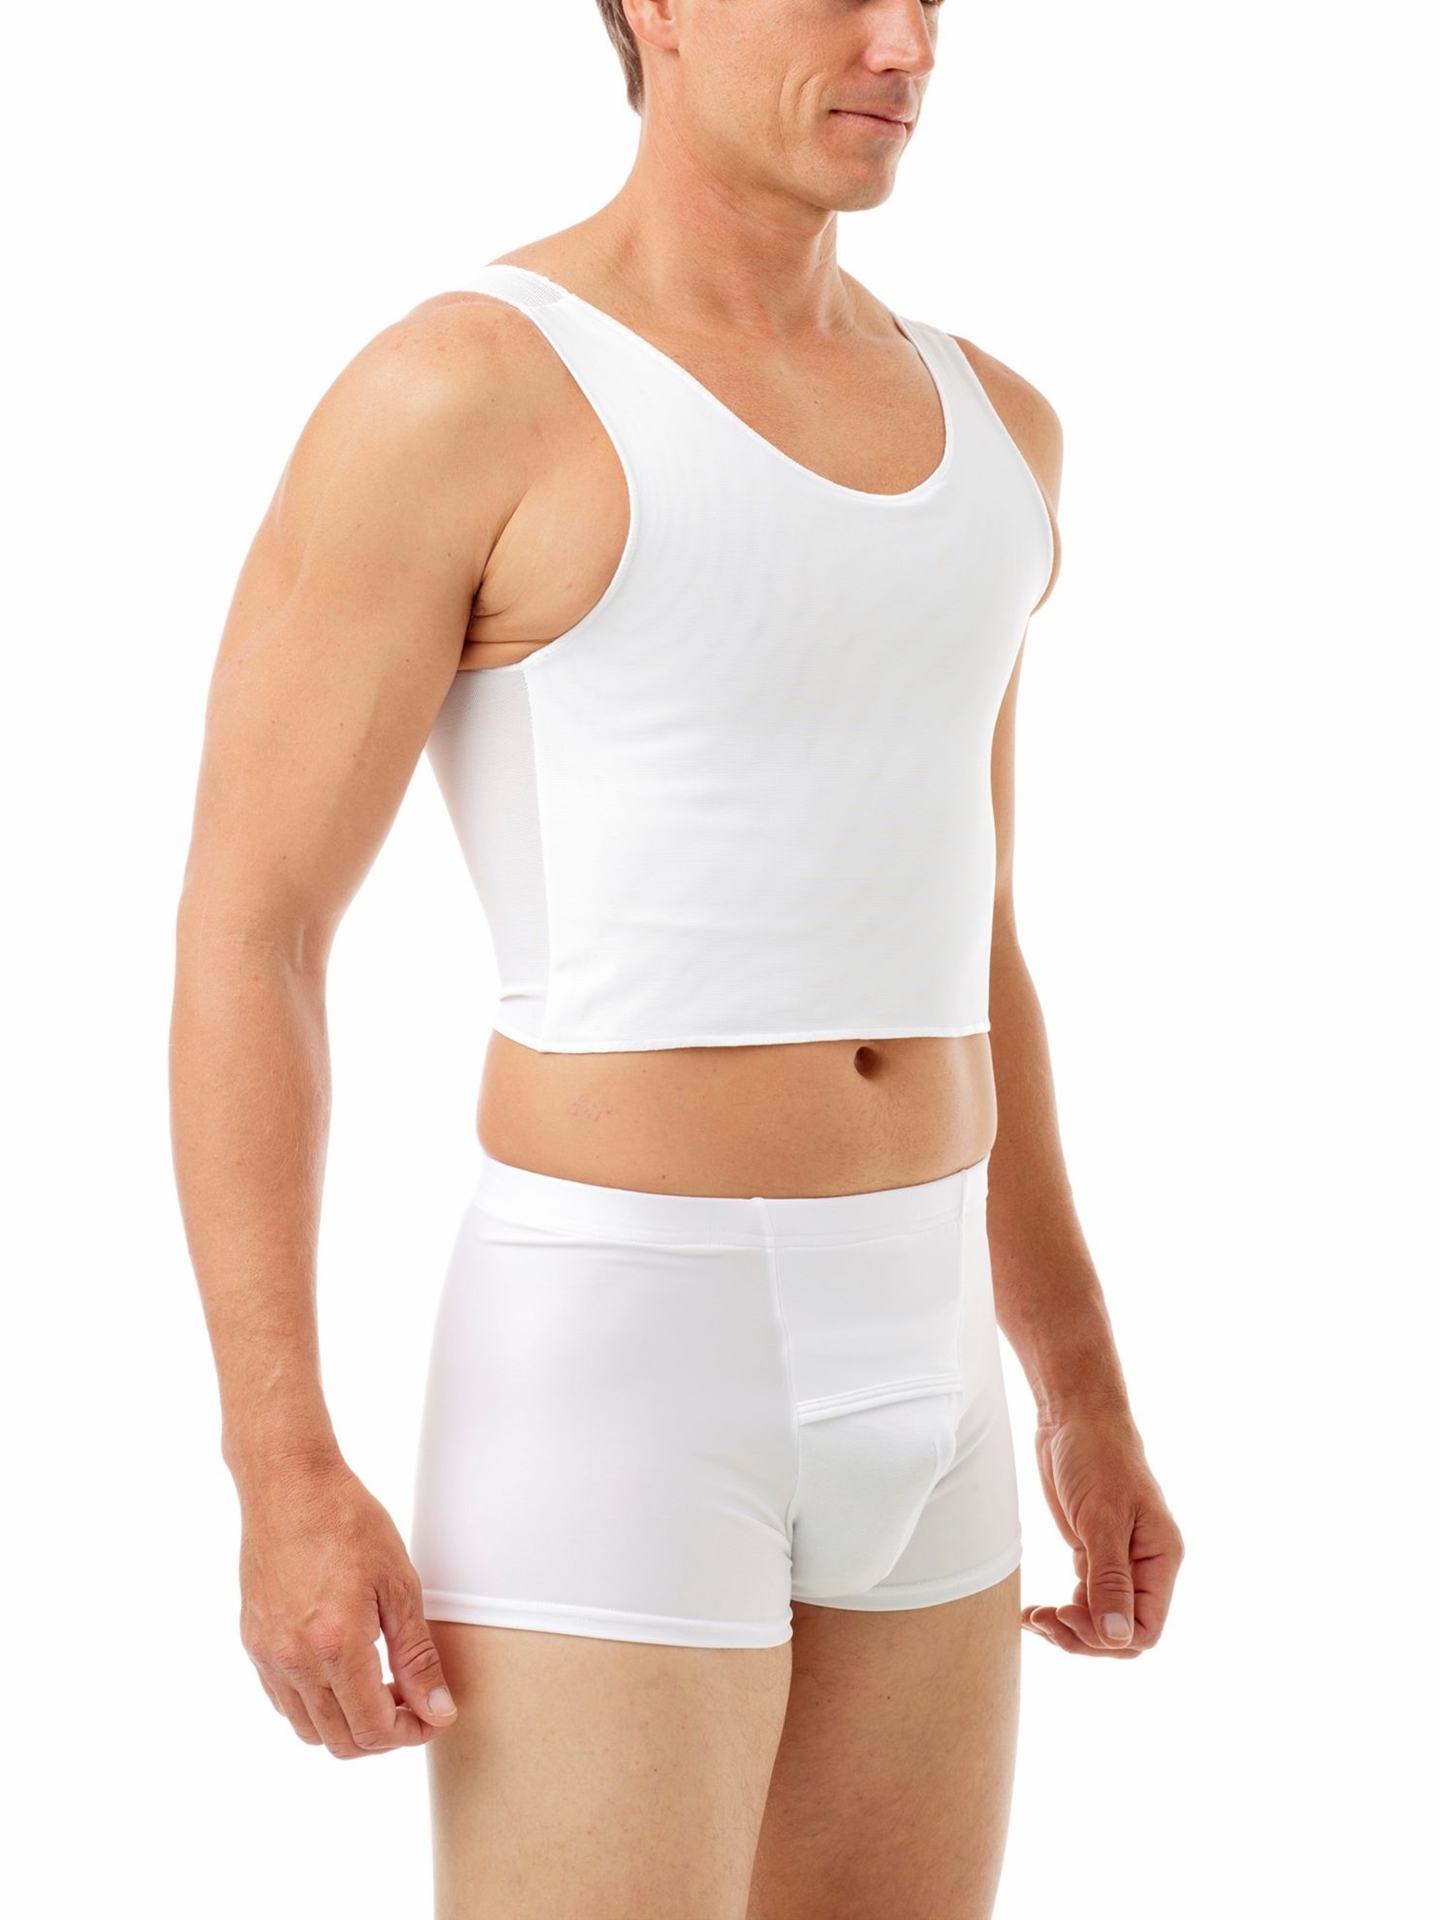 Looking for binder recs for a size 38C chest. : r/trans